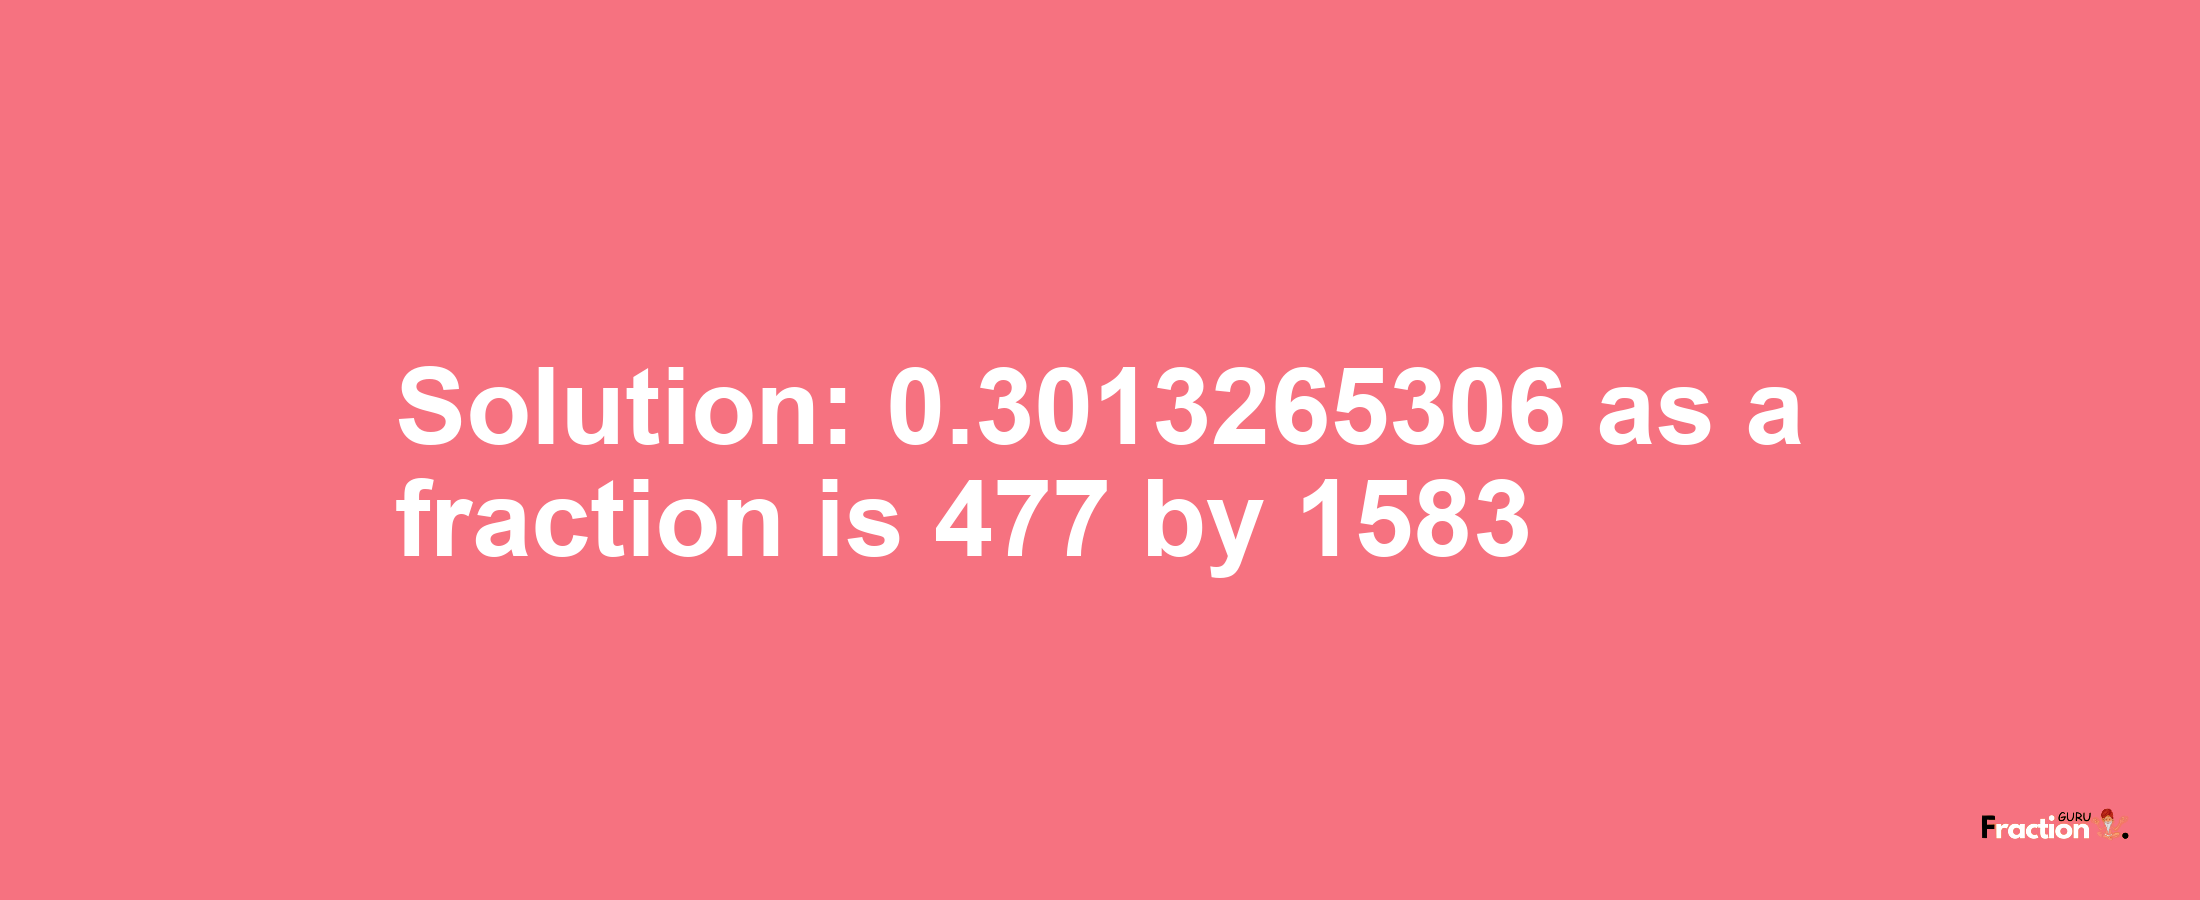 Solution:0.3013265306 as a fraction is 477/1583